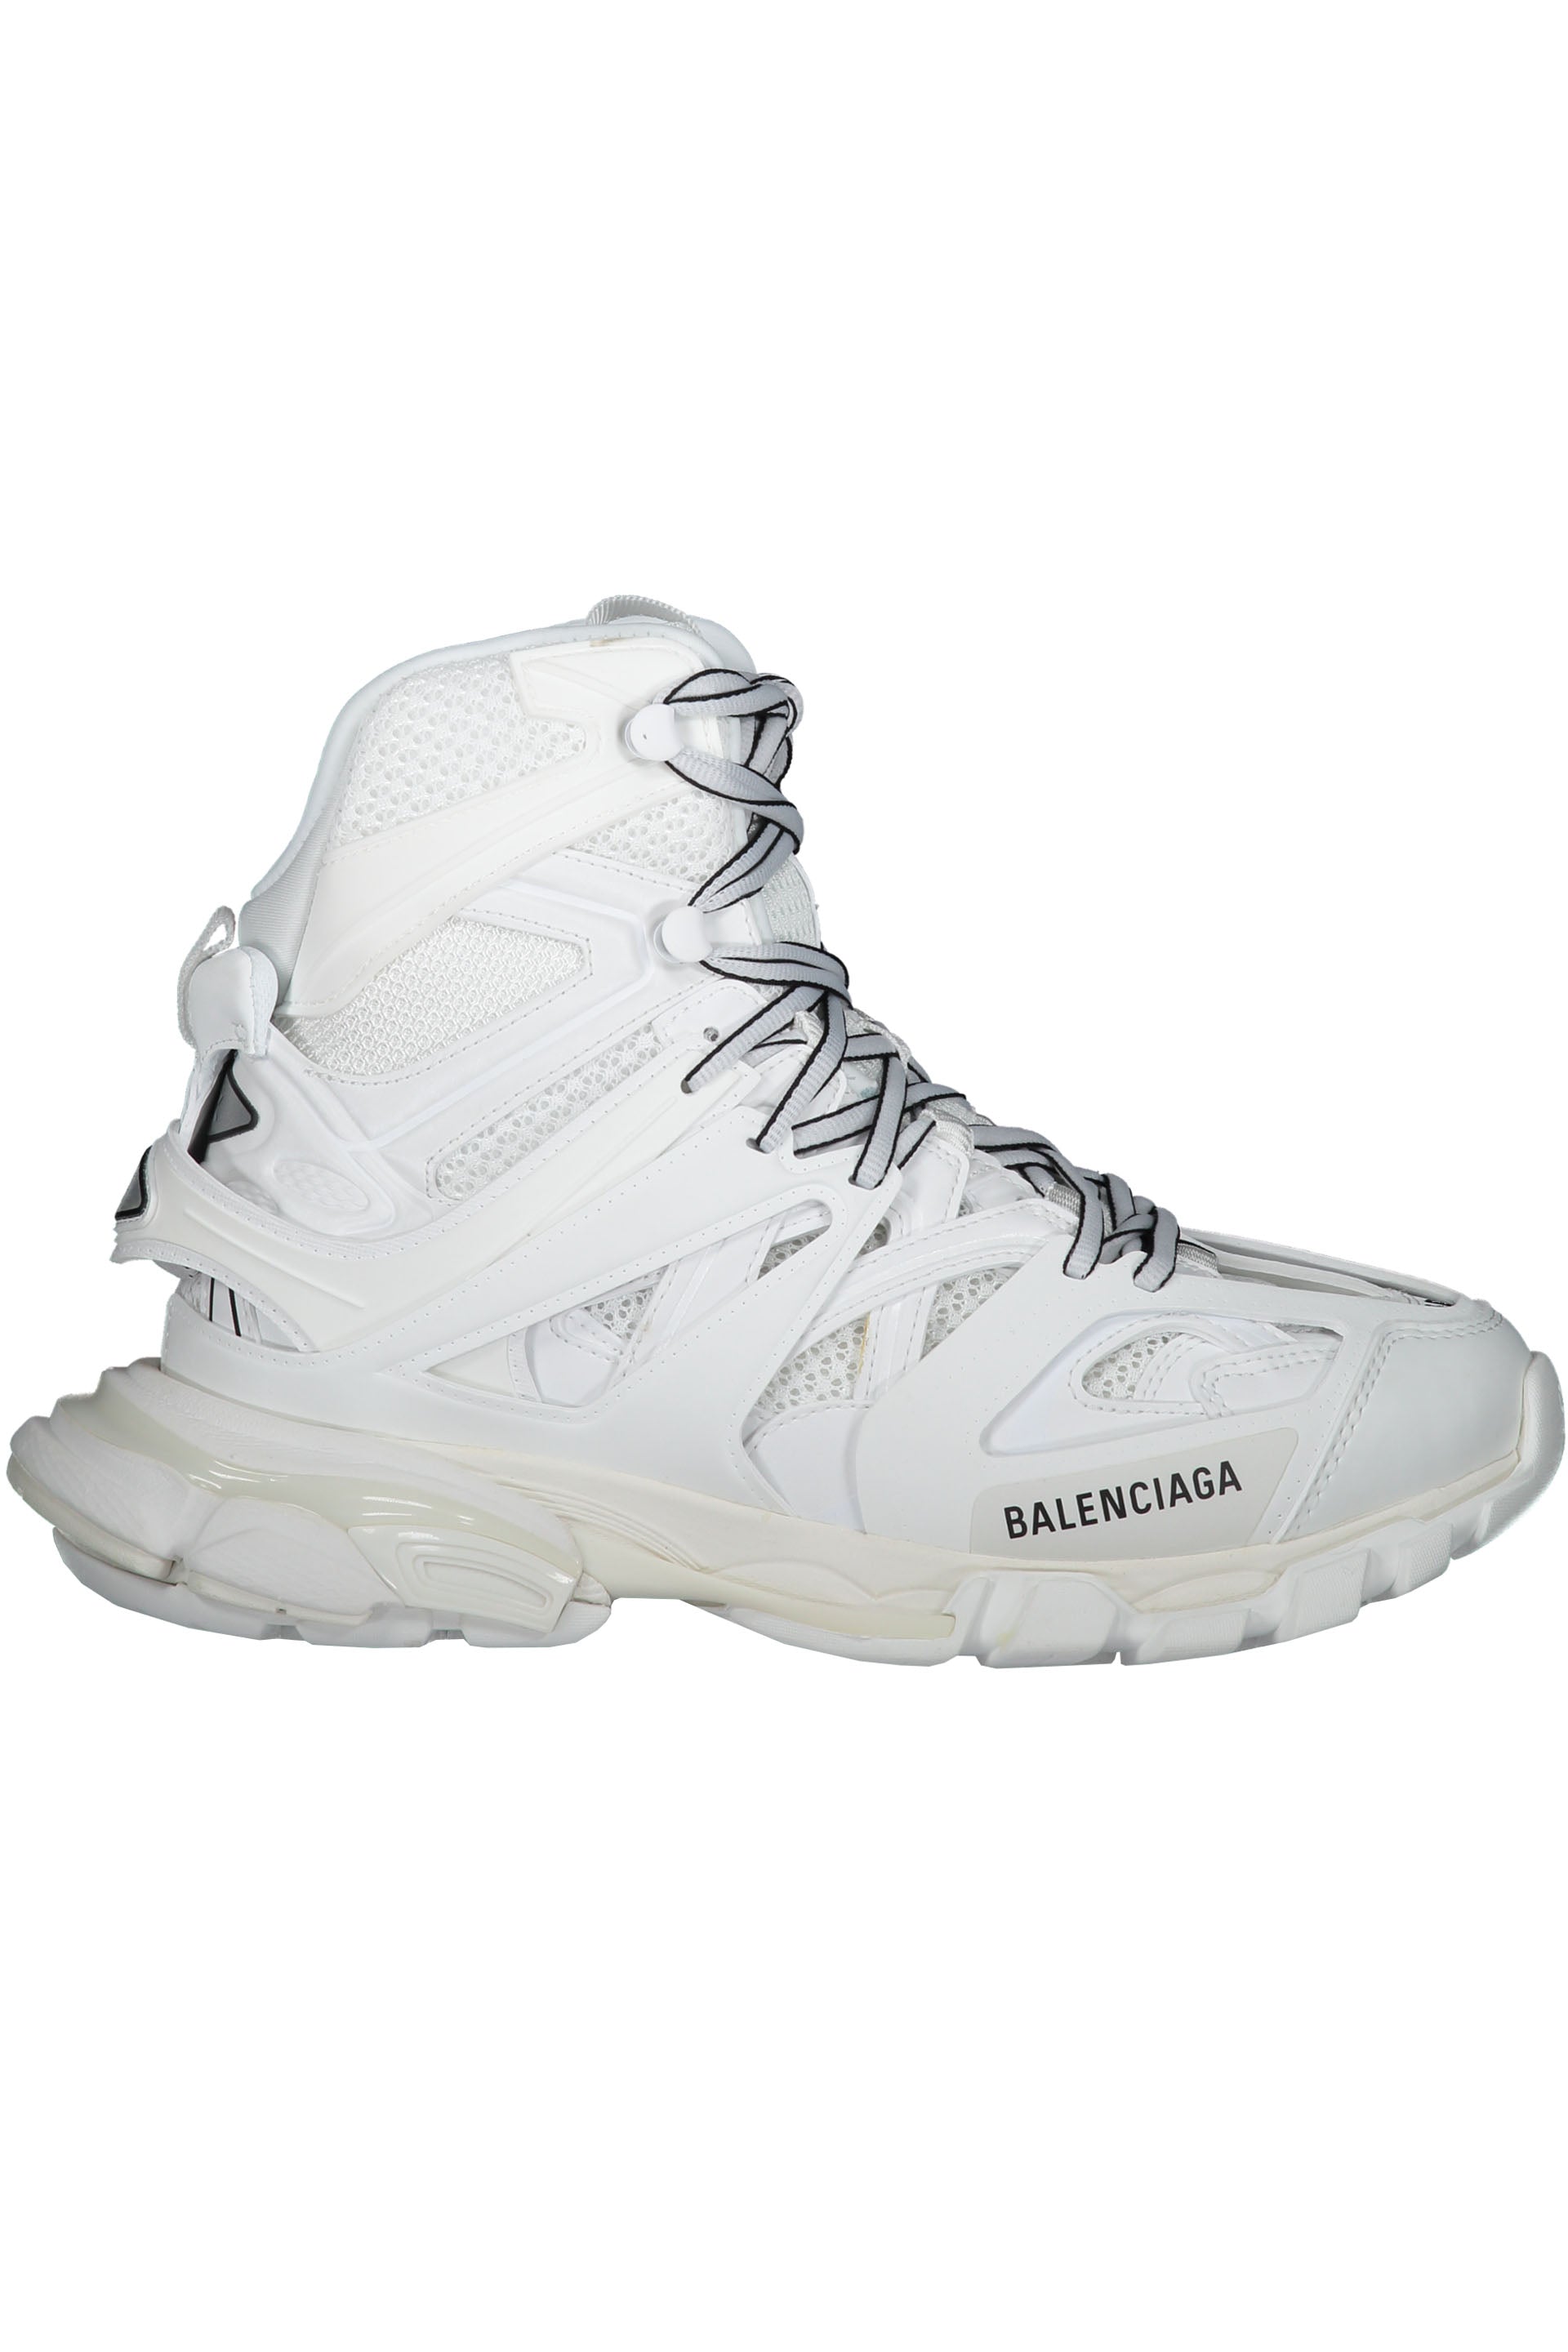 Track Hike high-top sneakers-Balenciaga-OUTLET-SALE-40-ARCHIVIST